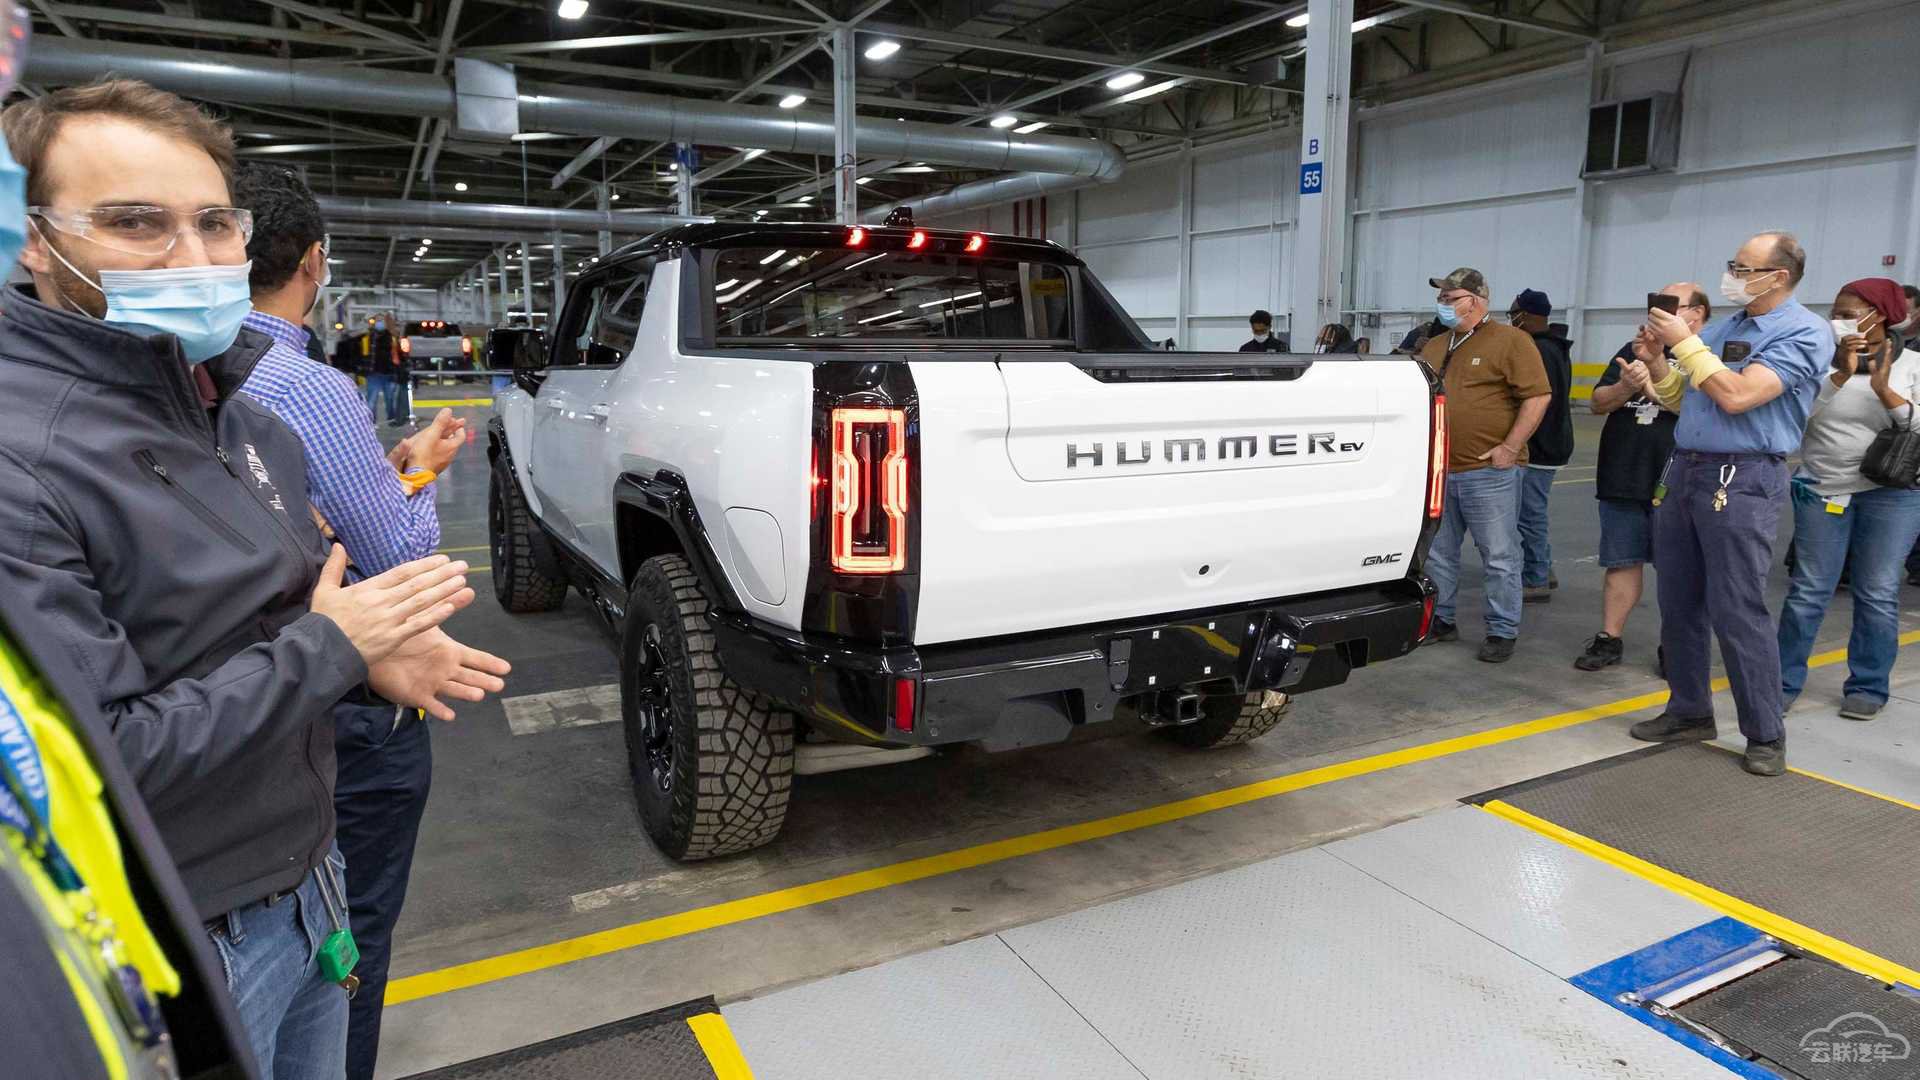 2022-gmc-hummer-ev-edition-1-pickup-in-production-ready-for-customer-deliveries (3).jpg